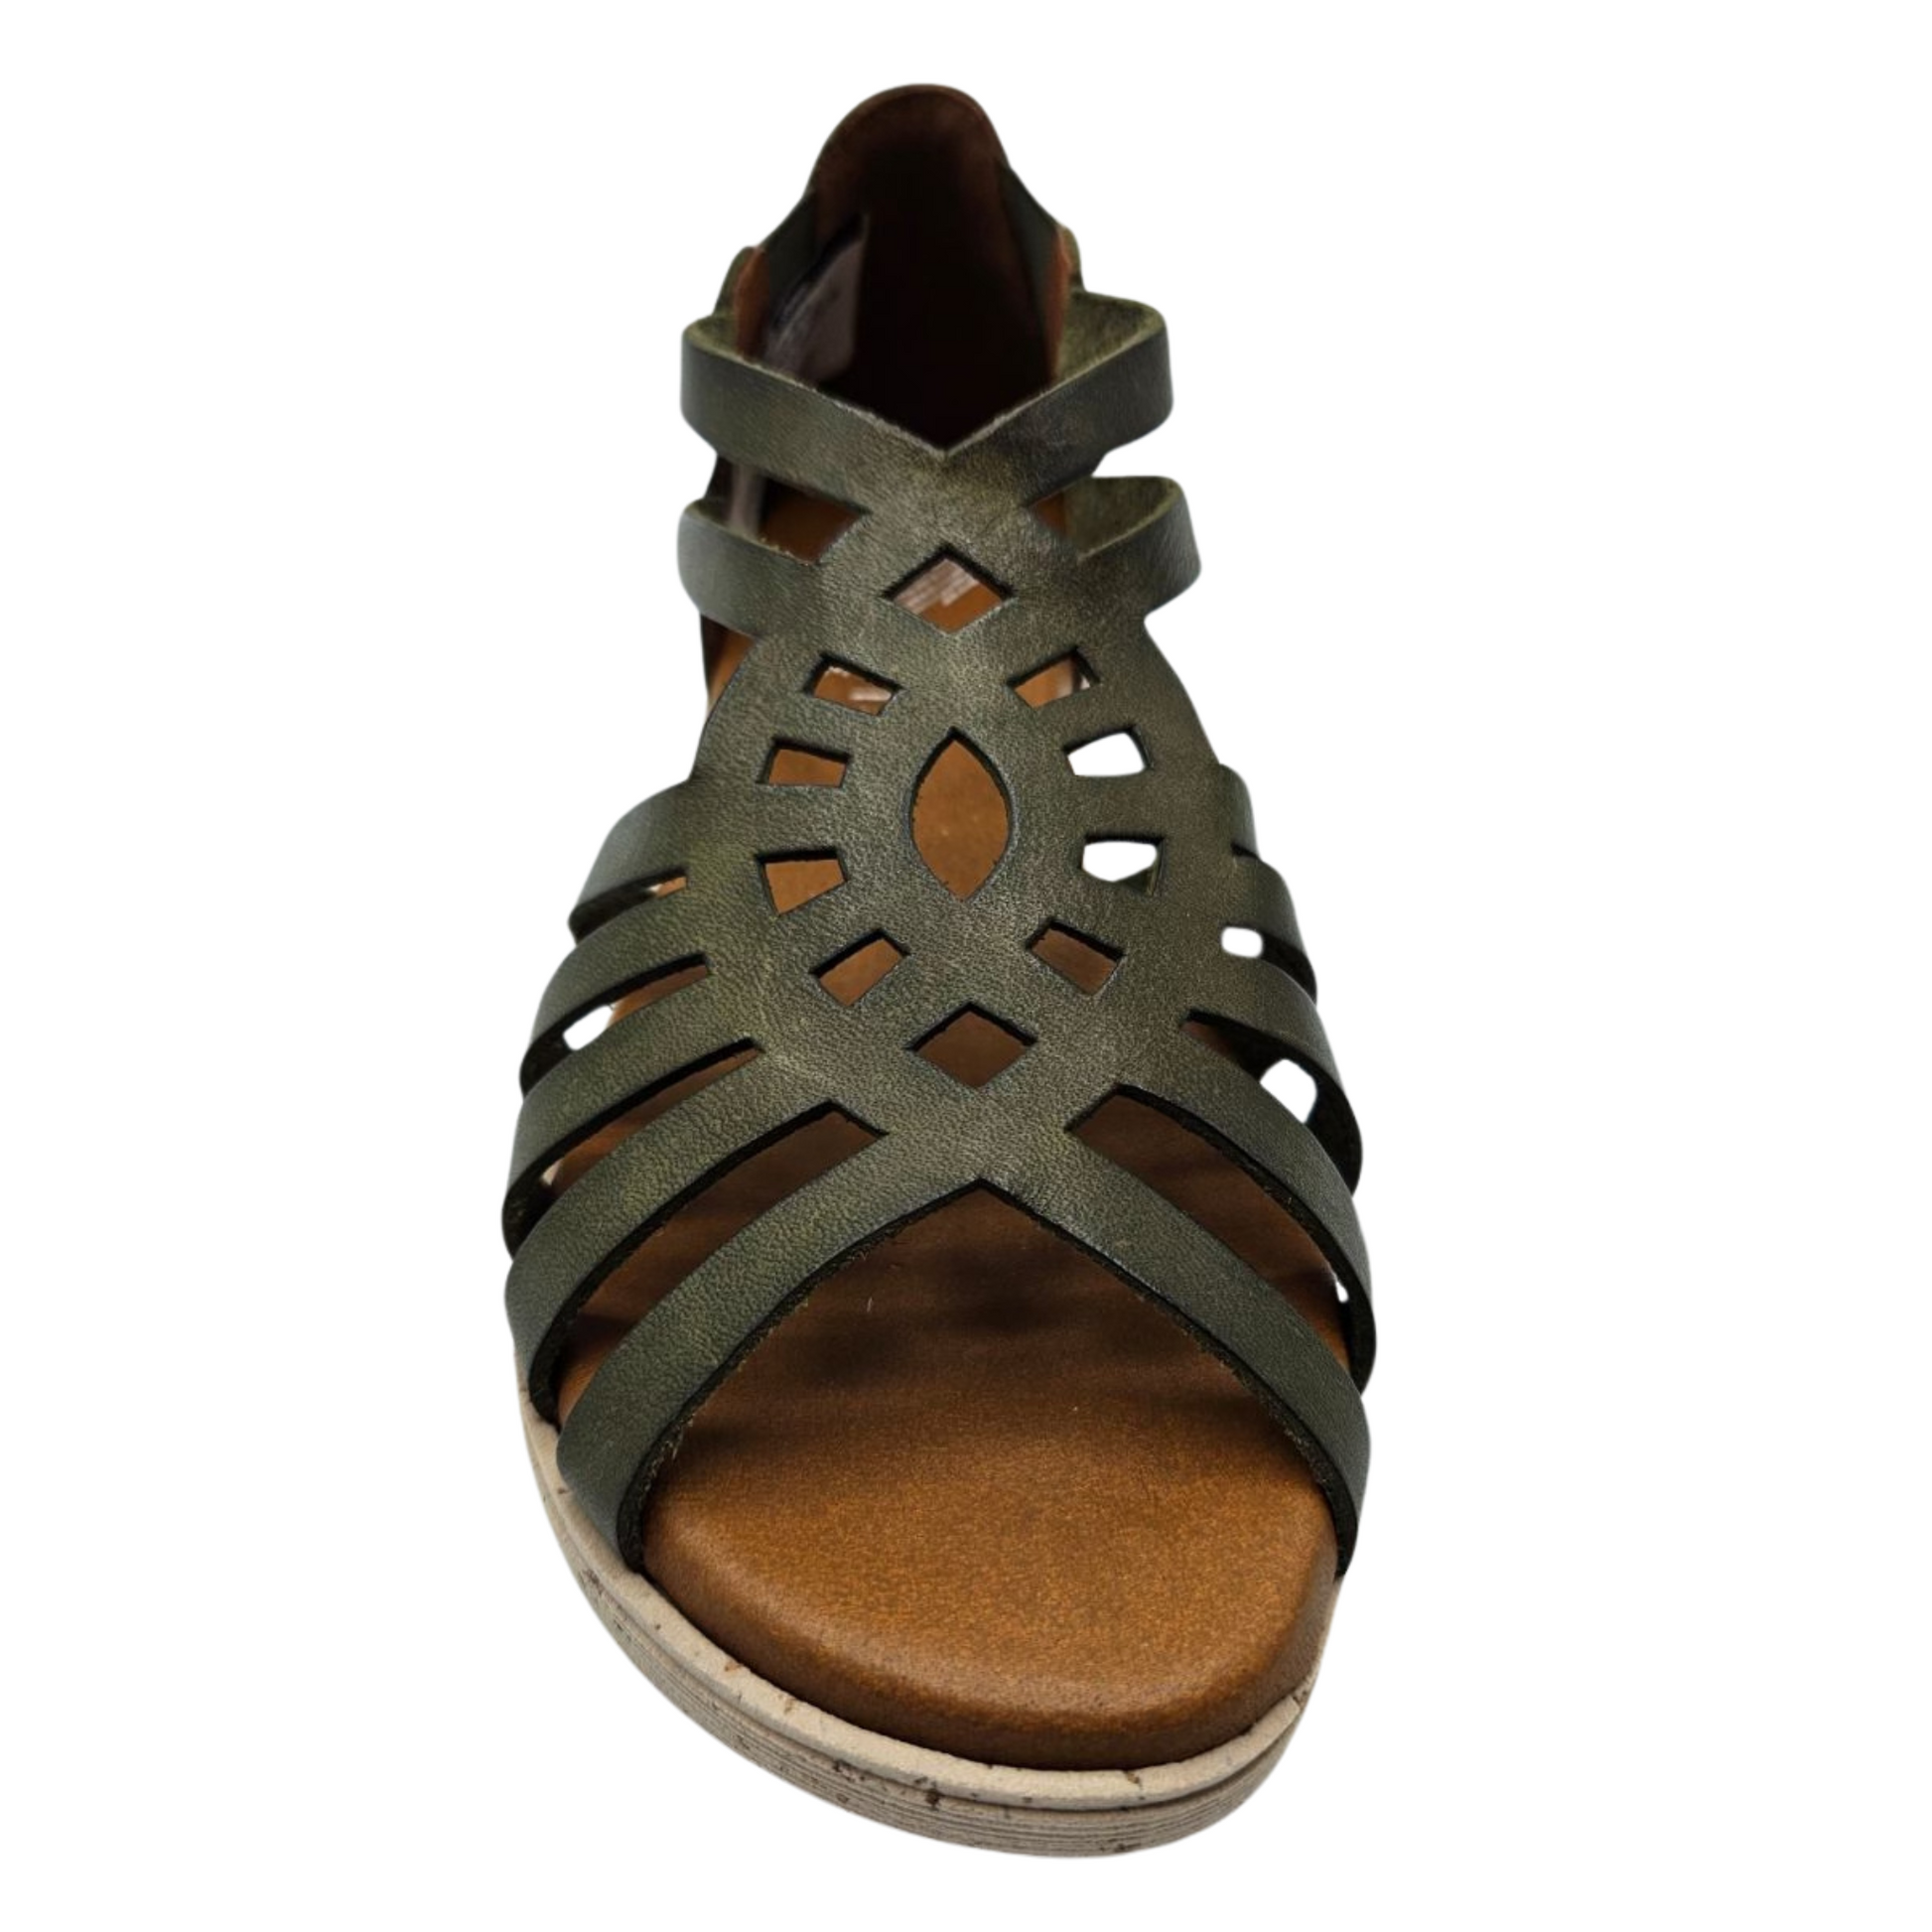 Front facing view of olive green leather sandal with a cutout design, peep toe and lined leather footbed.